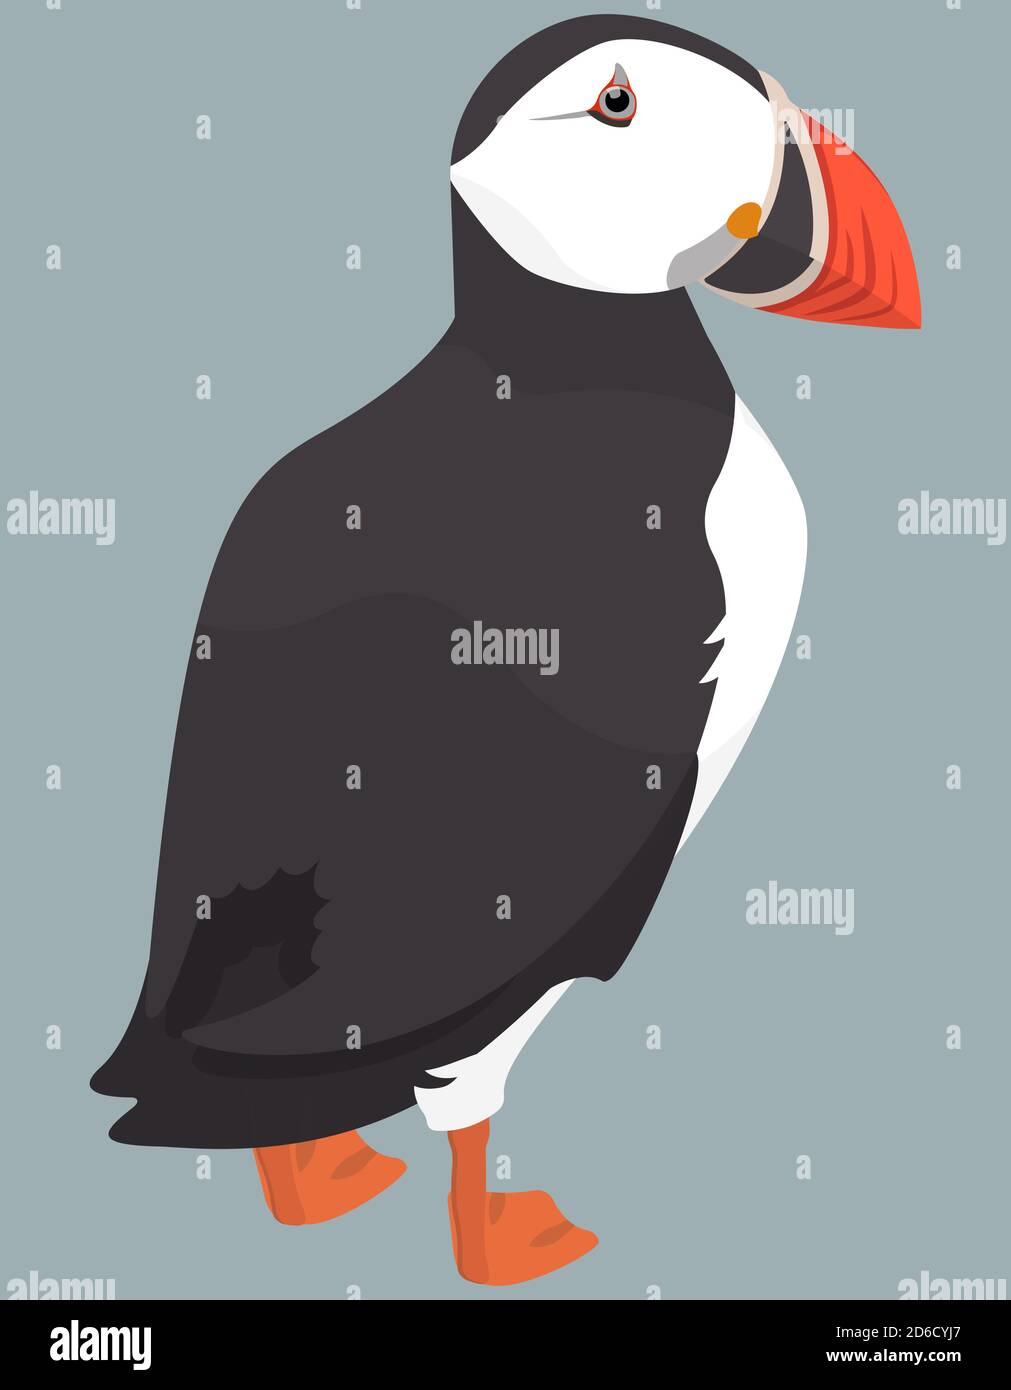 Atlantic puffin back view. Northern bird in cartoon style. Stock Vector